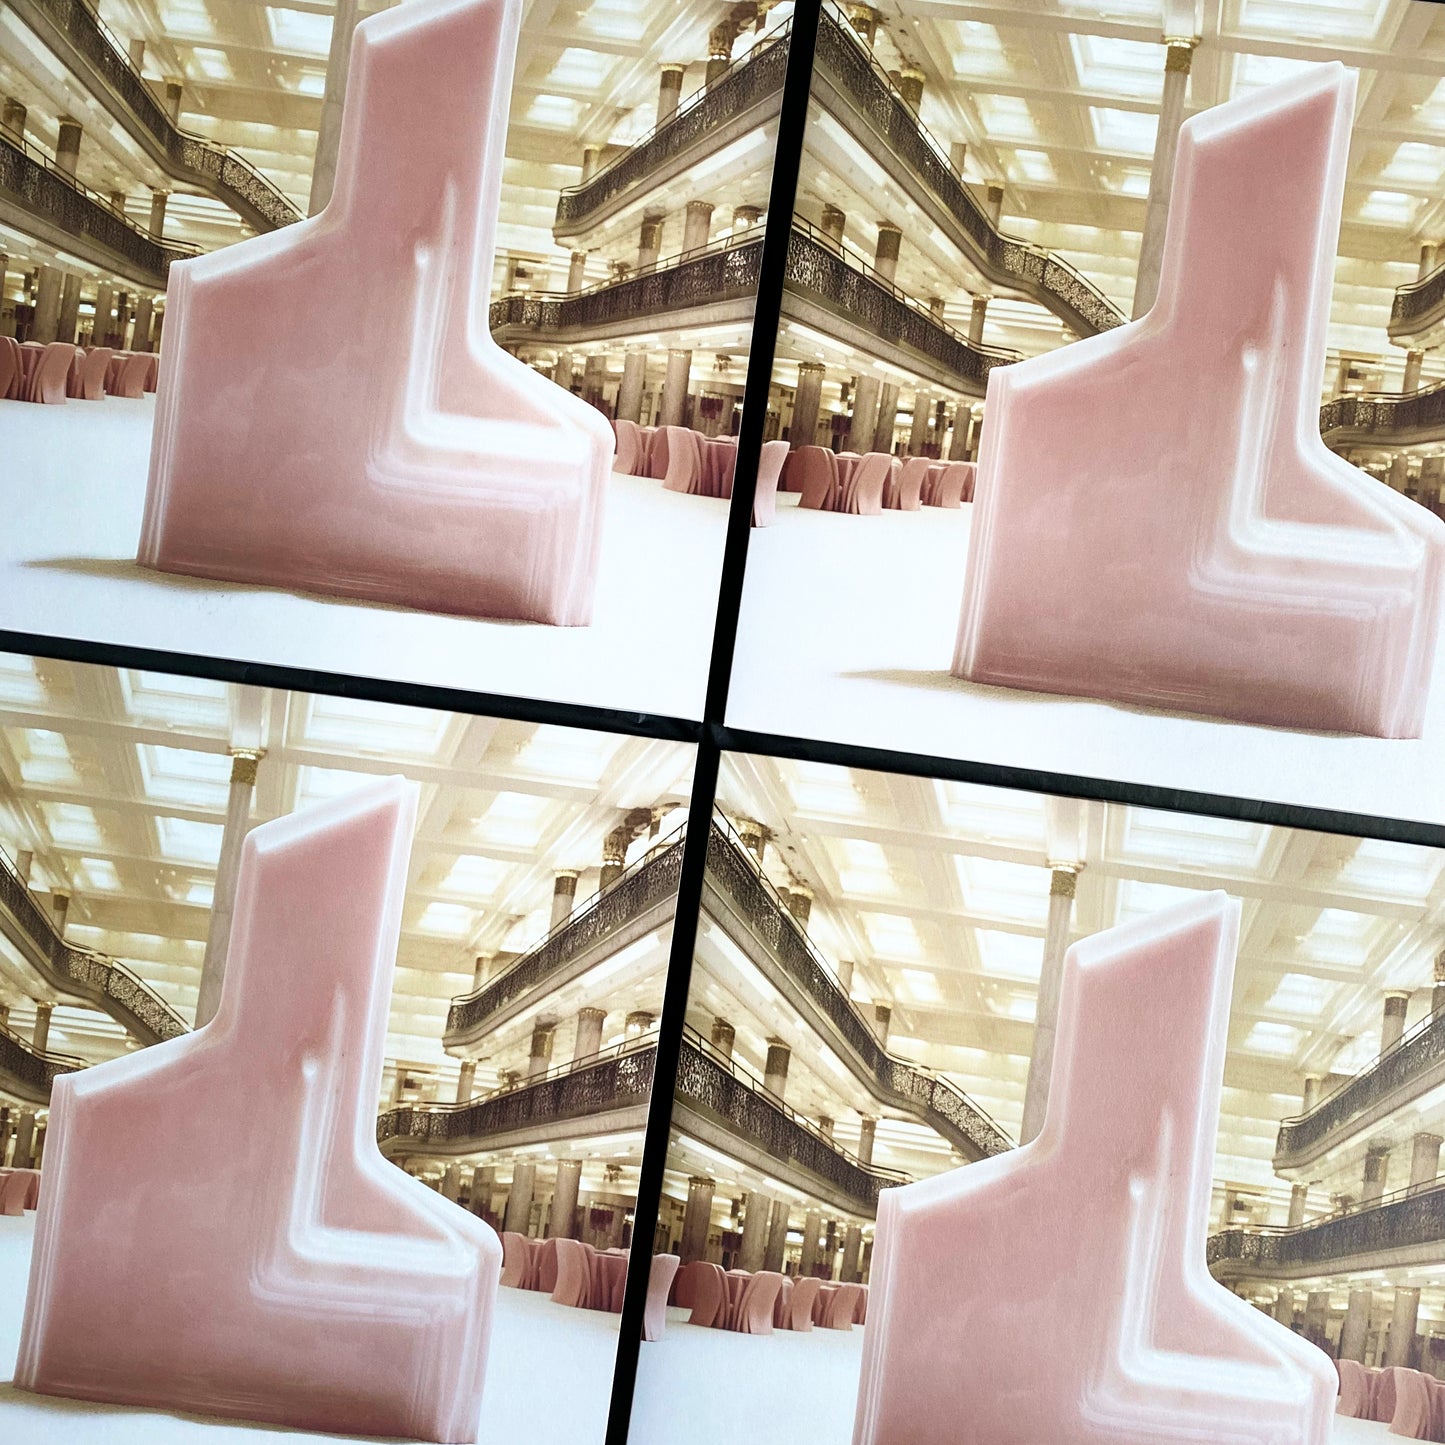 Philipp Priebe – Movements In An Empty Department Store